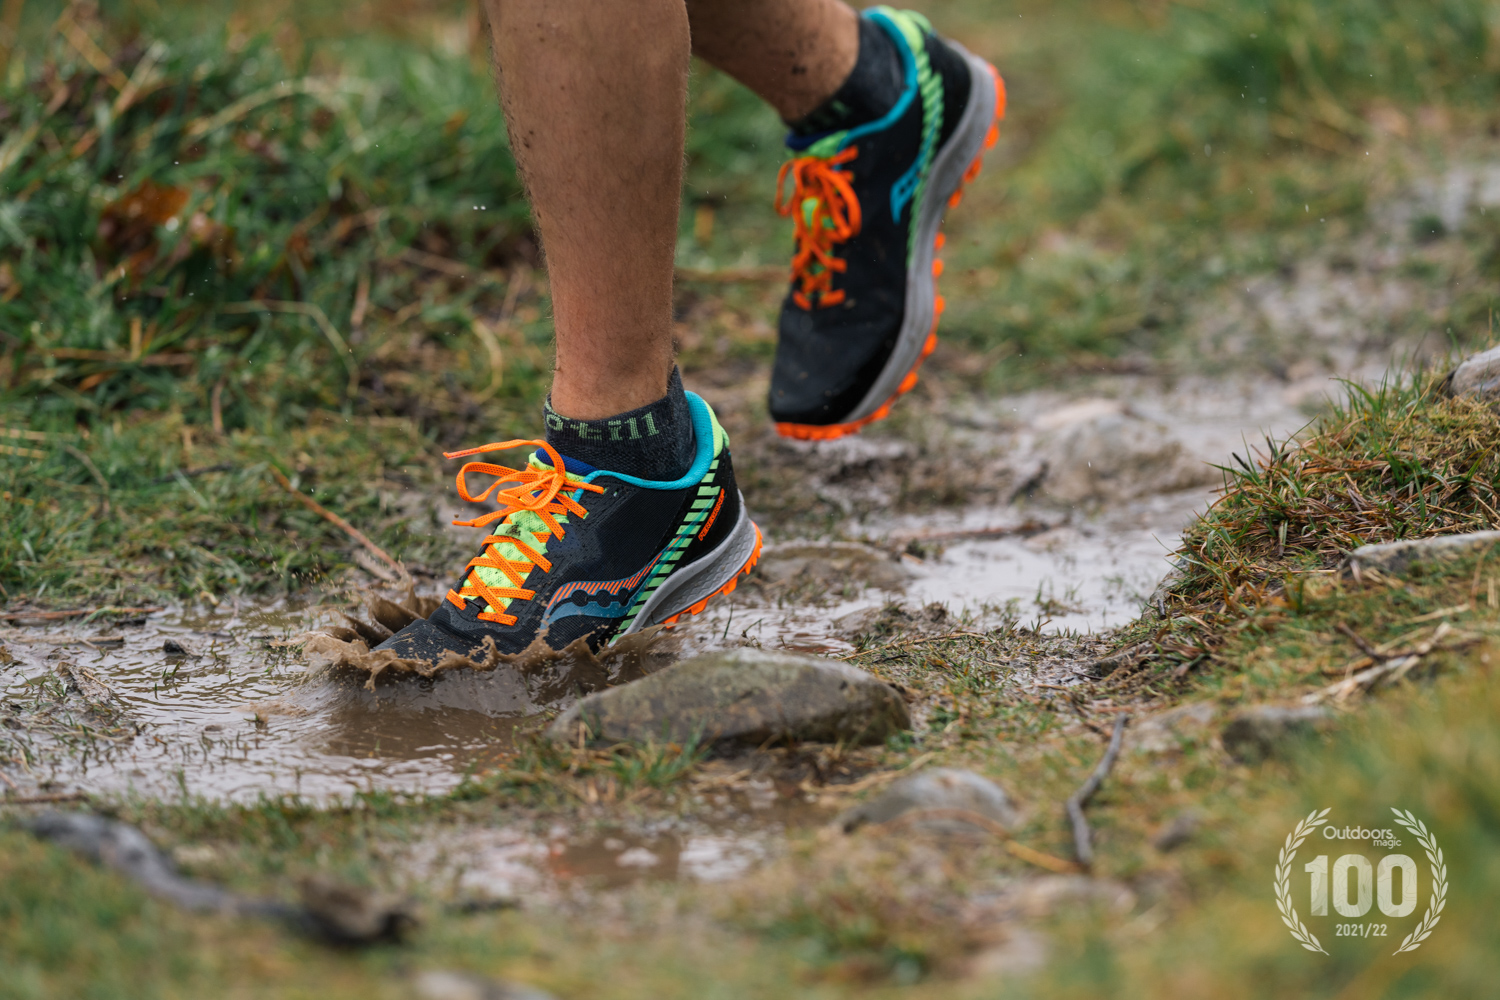 Saucony Peregrine 11 Trail Running Shoe | Review